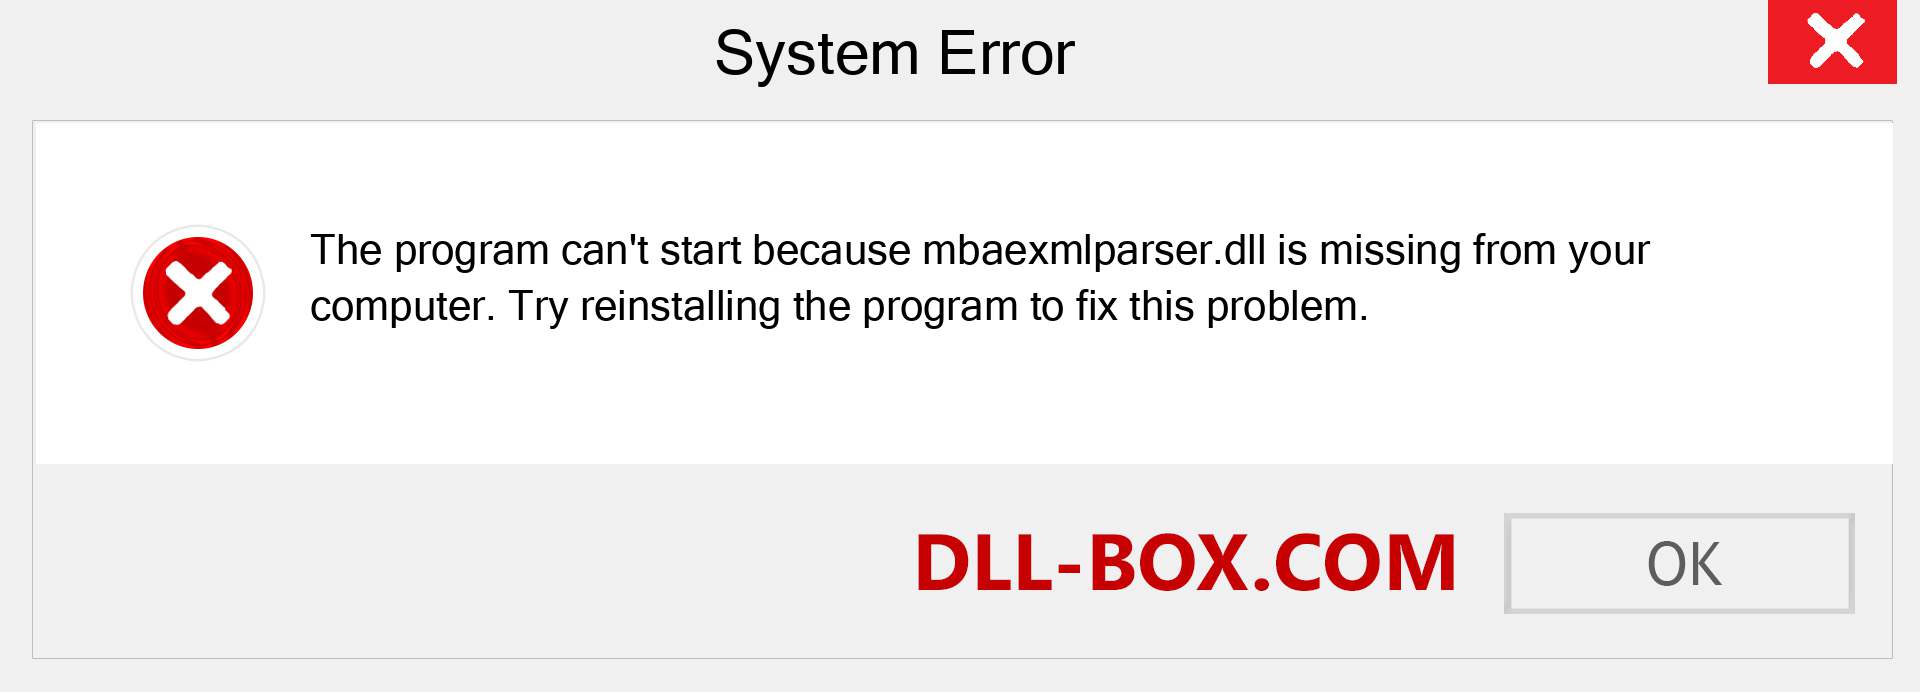  mbaexmlparser.dll file is missing?. Download for Windows 7, 8, 10 - Fix  mbaexmlparser dll Missing Error on Windows, photos, images